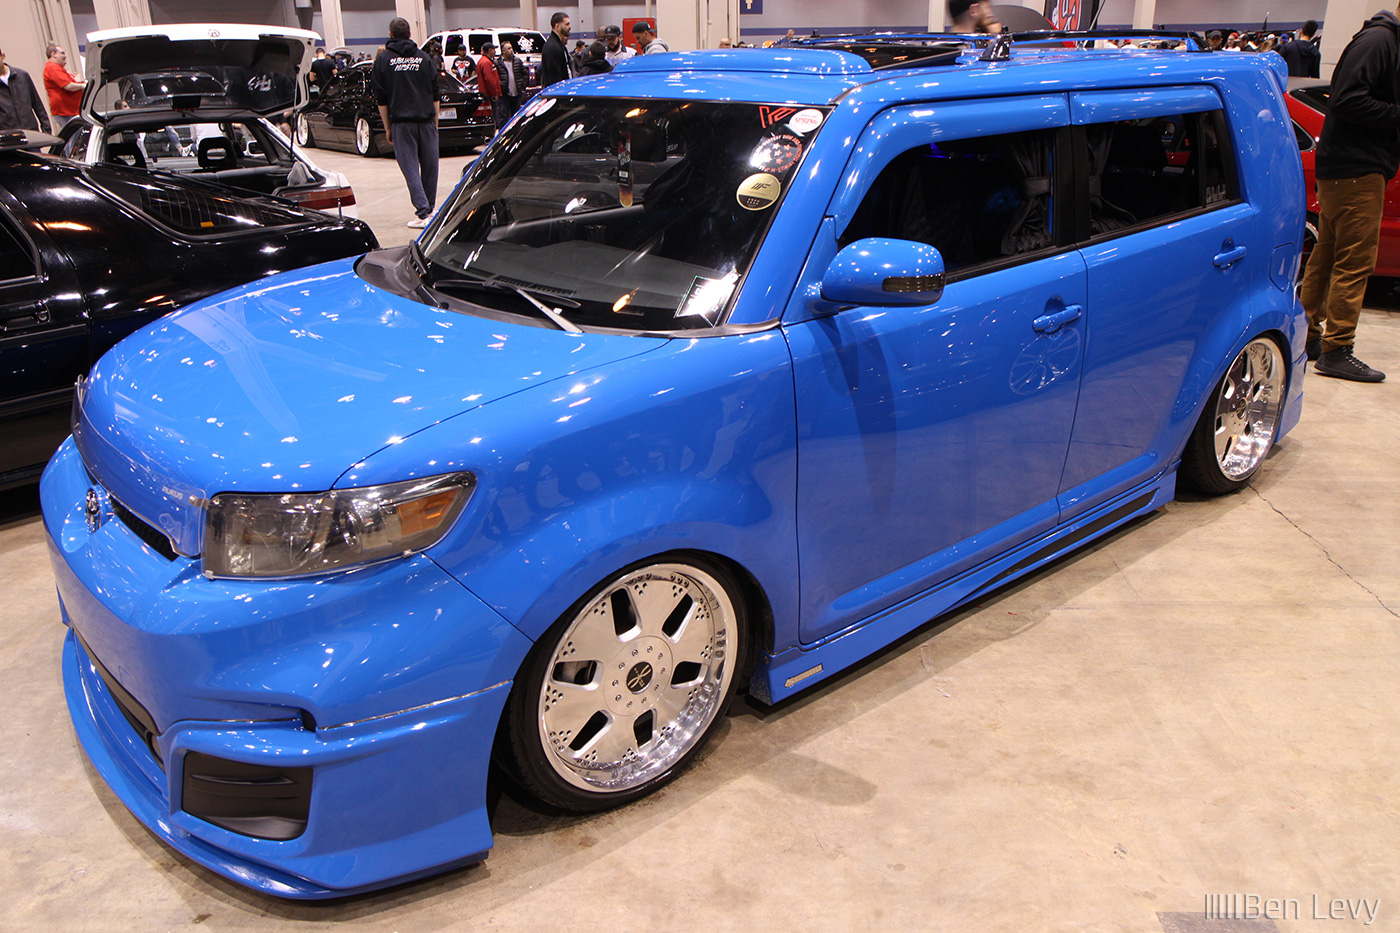 Blue Scion xB RS8.0 at Wekfest